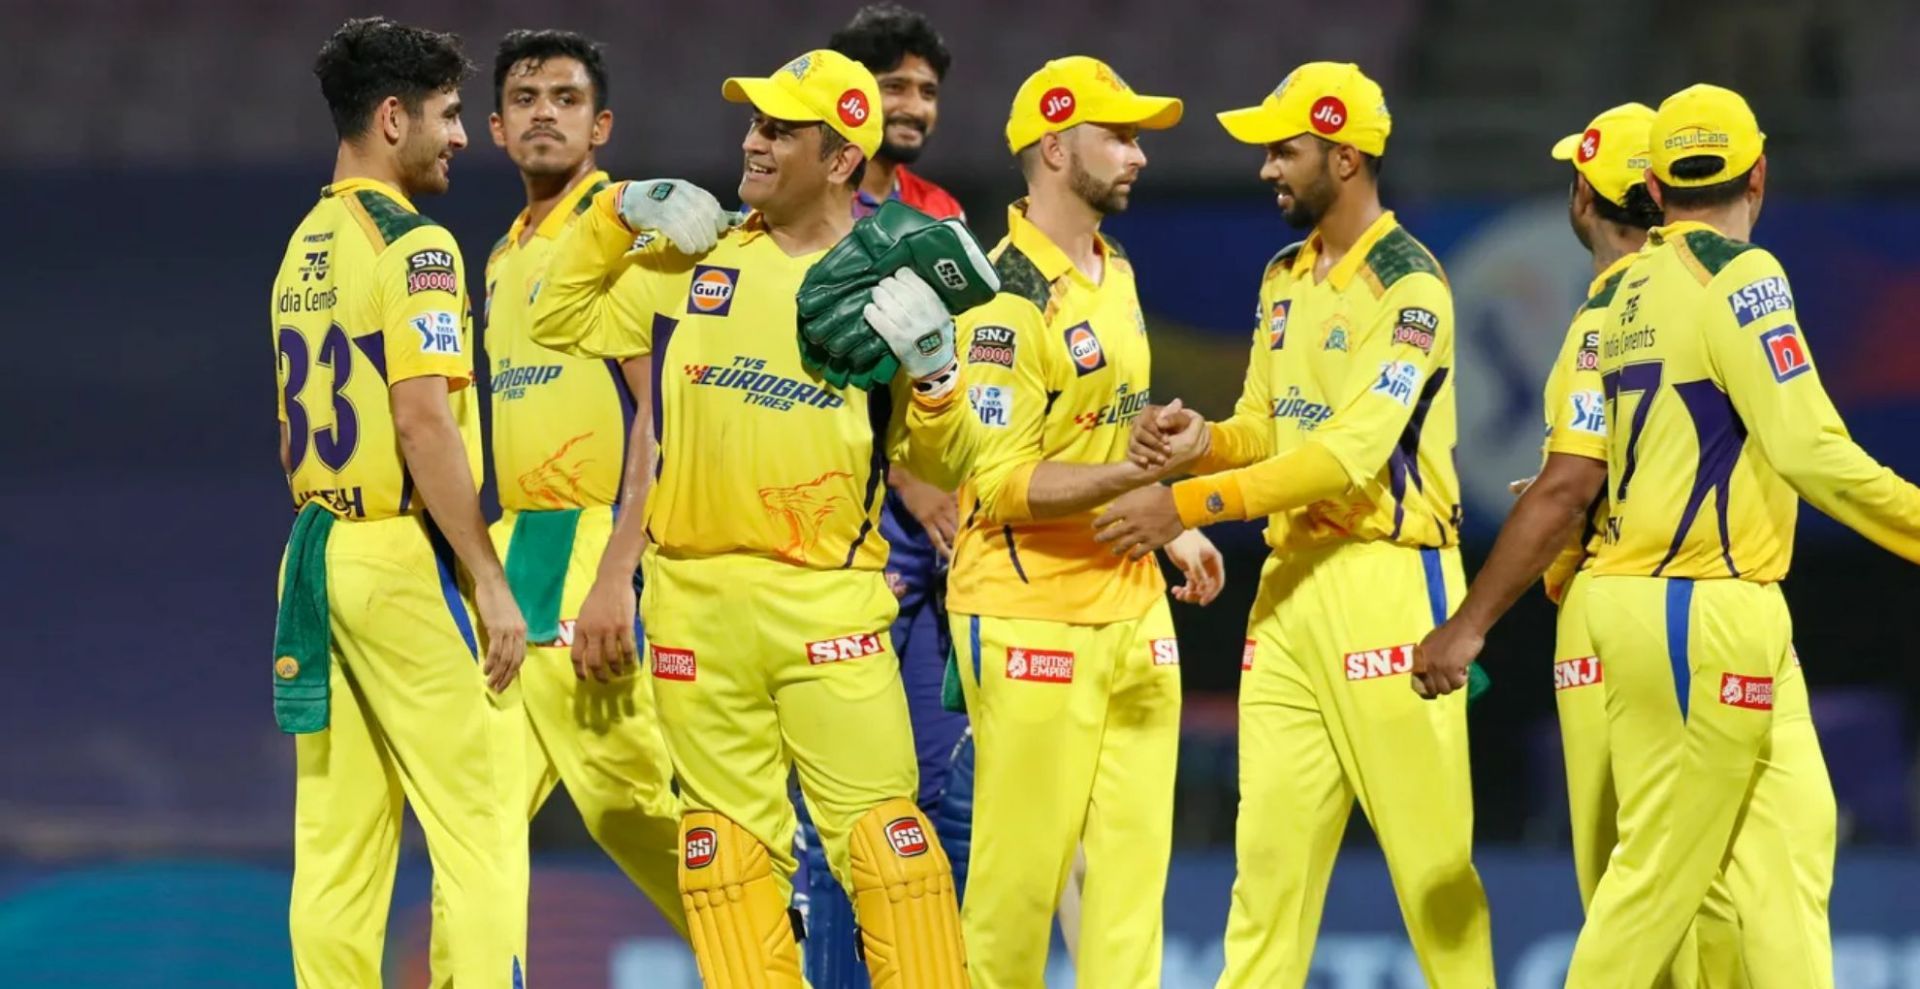 CSK have had a disastrous campaign in IPL 2022 (Credit: BCCI/IPL)